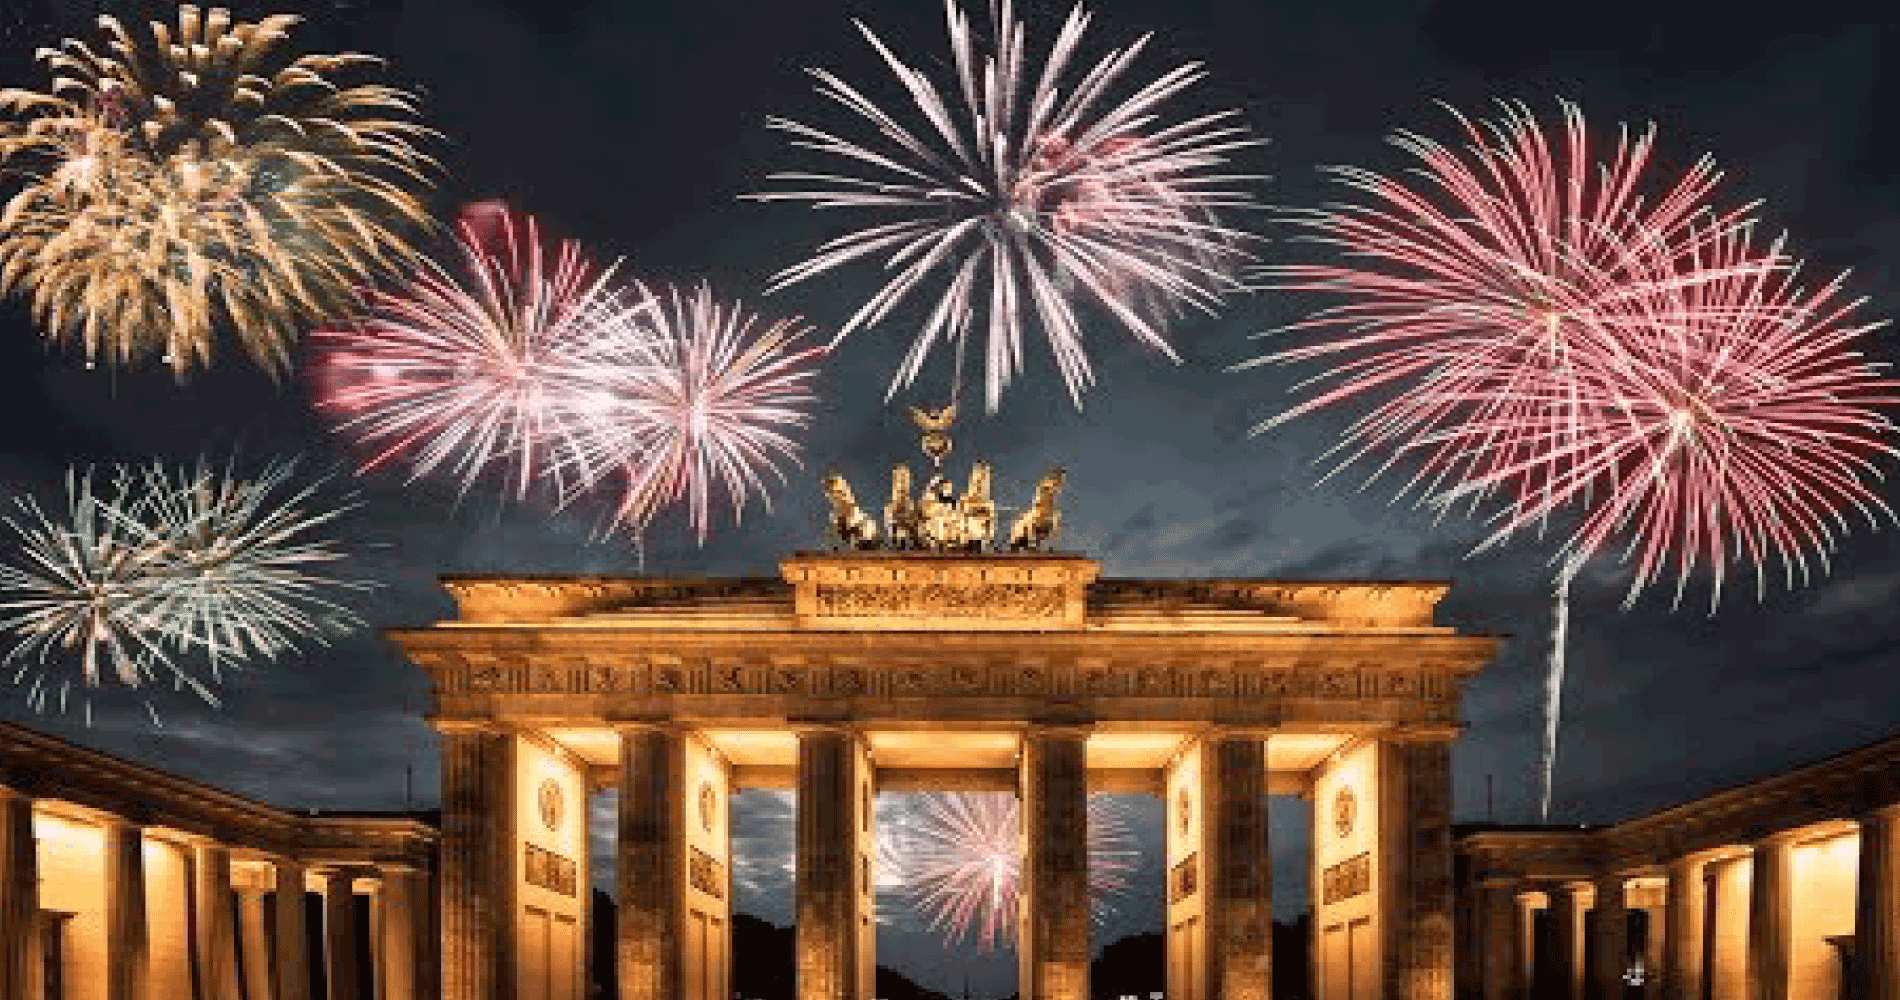 Berlin, the capital of Germany